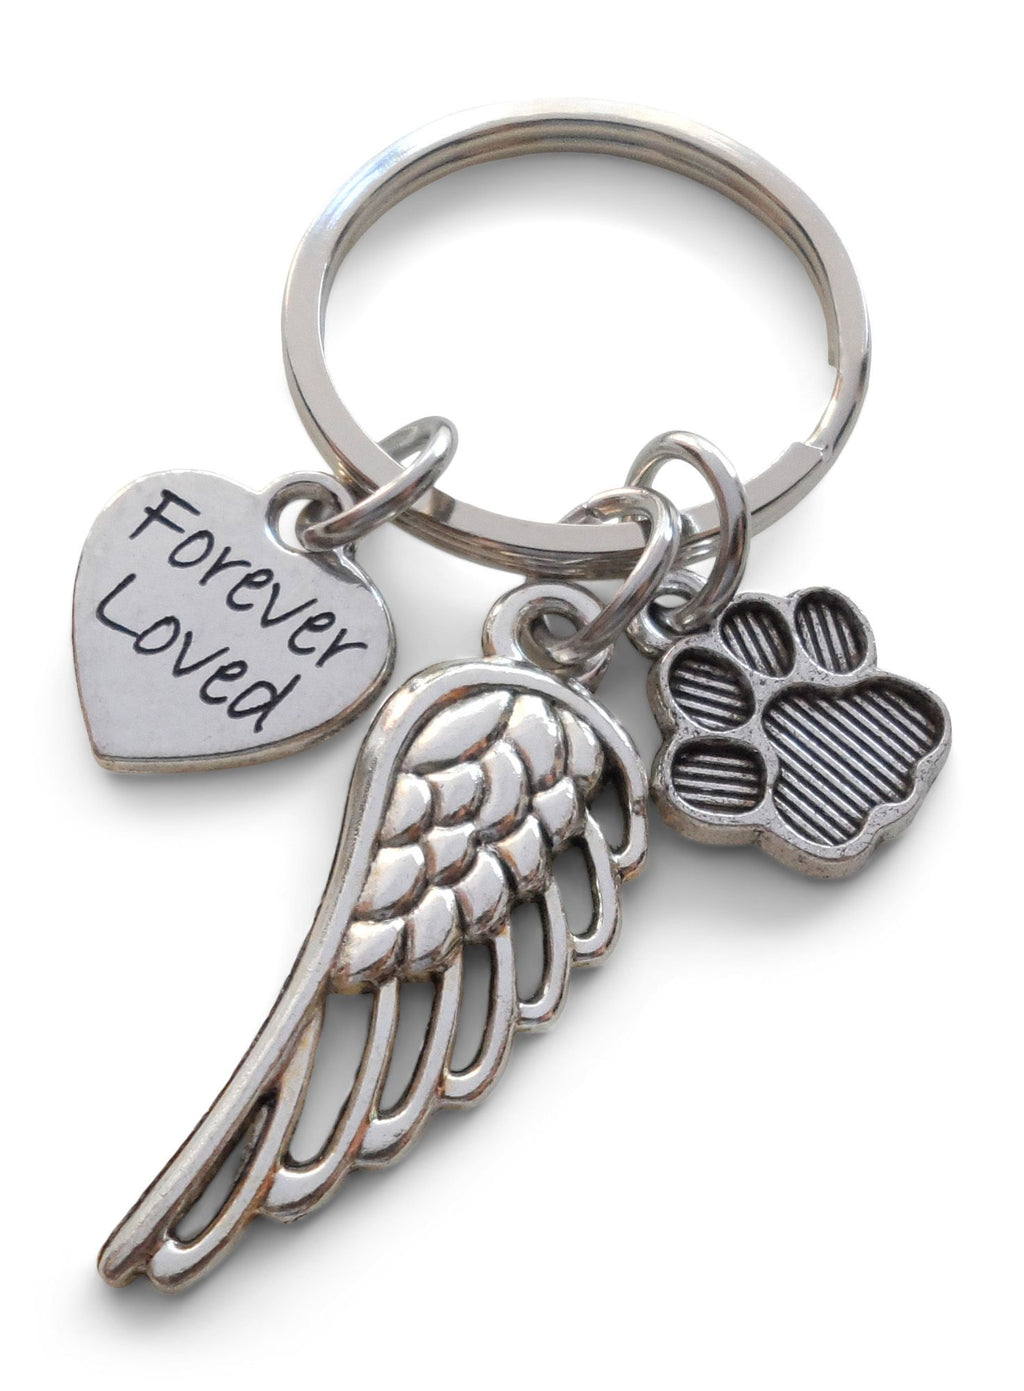 Paw & Wing Charm Keychain with a Forever Loved Heart Charm, Pet Memorial Keychain